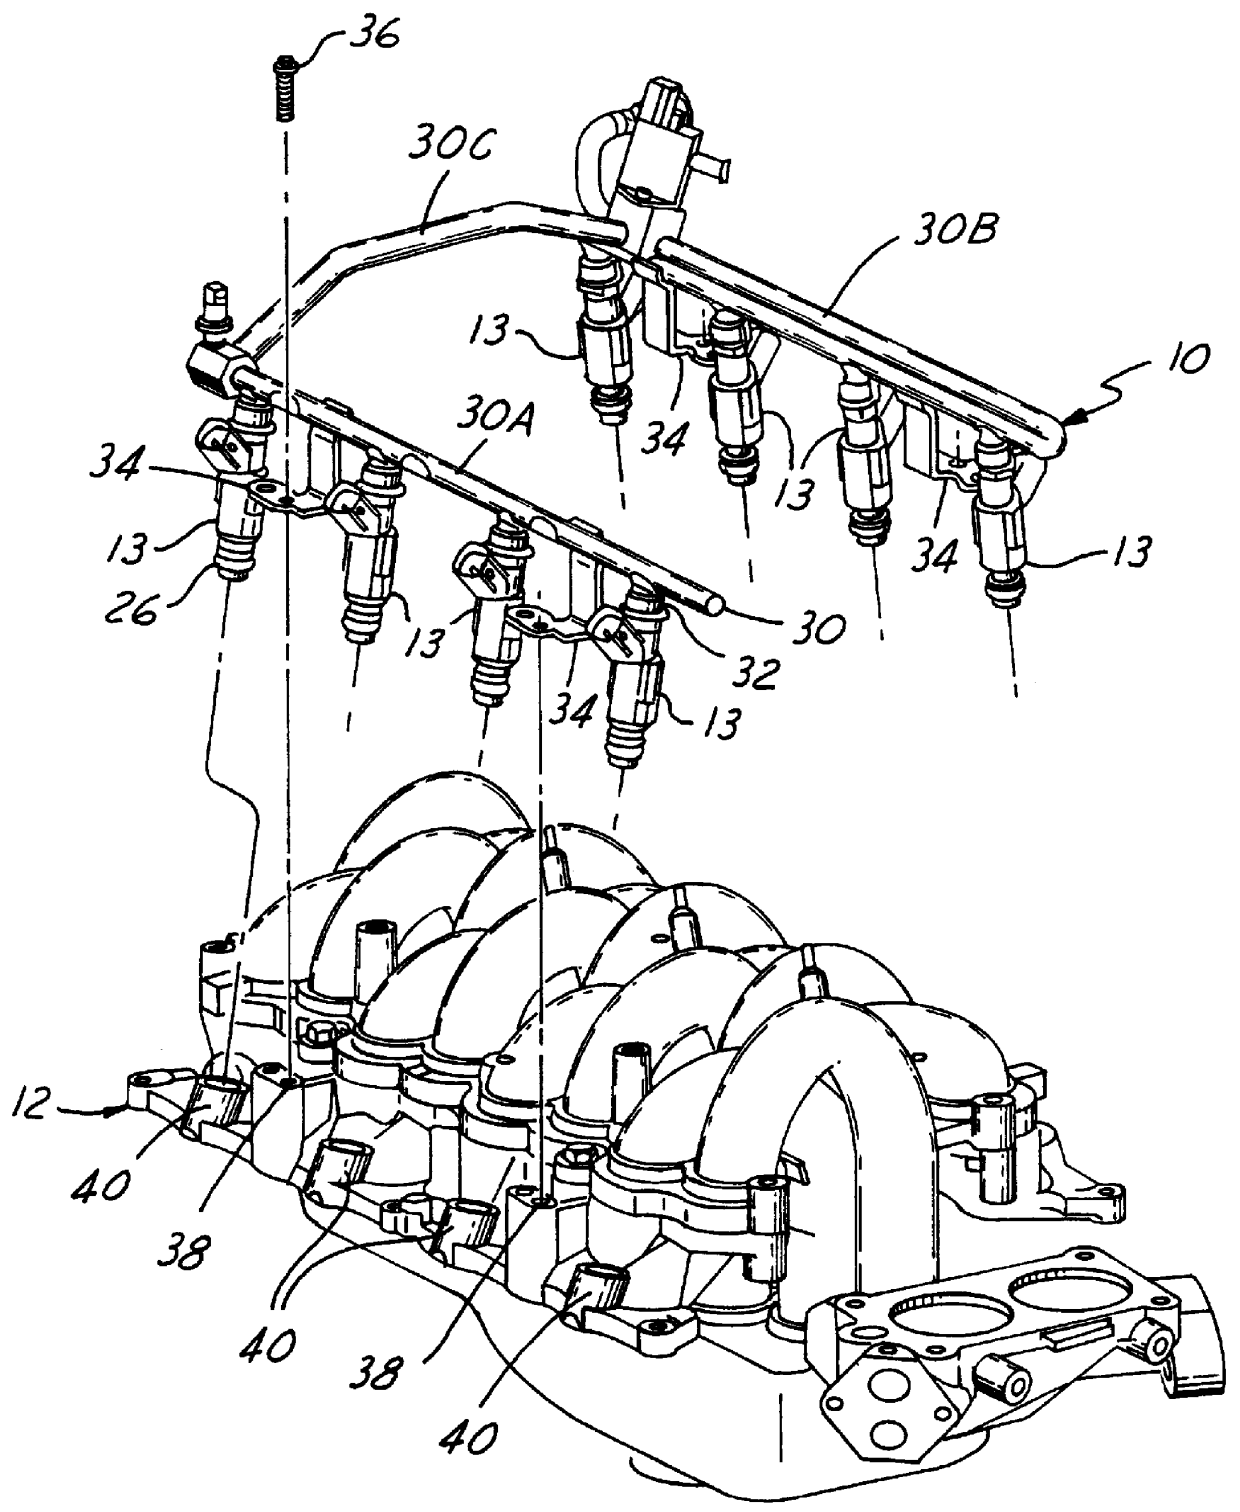 Arrangement for orienting a fuel injector to a fuel manifold cup